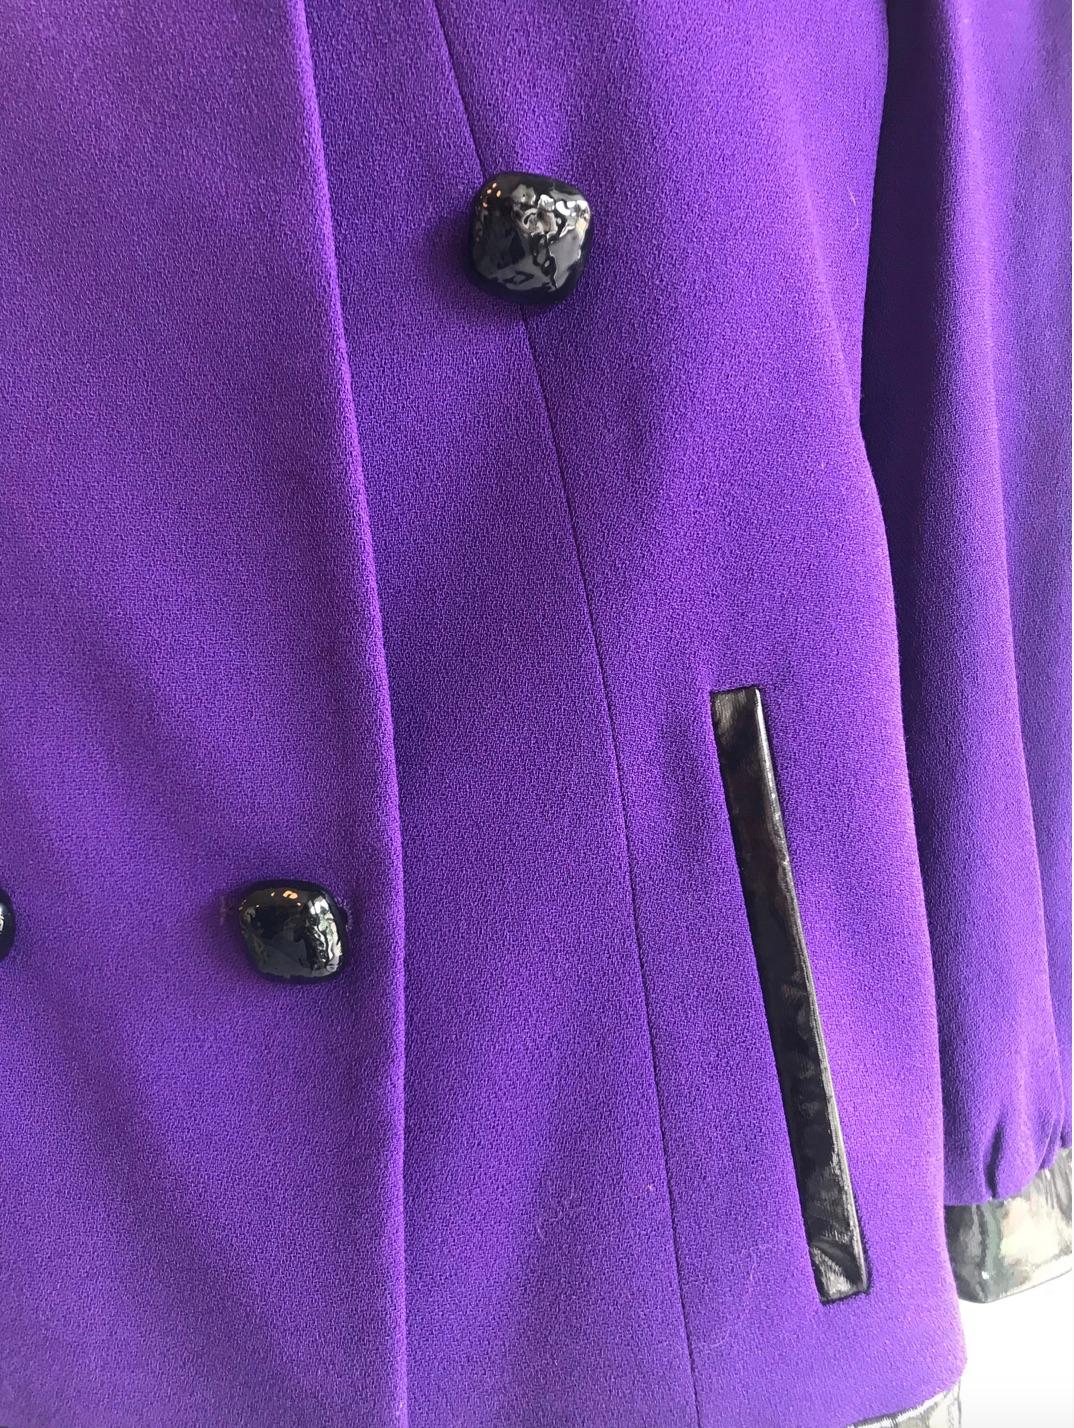 Wool & Patent Armani Collezioni Jacket In Good Condition For Sale In Glasgow, GB